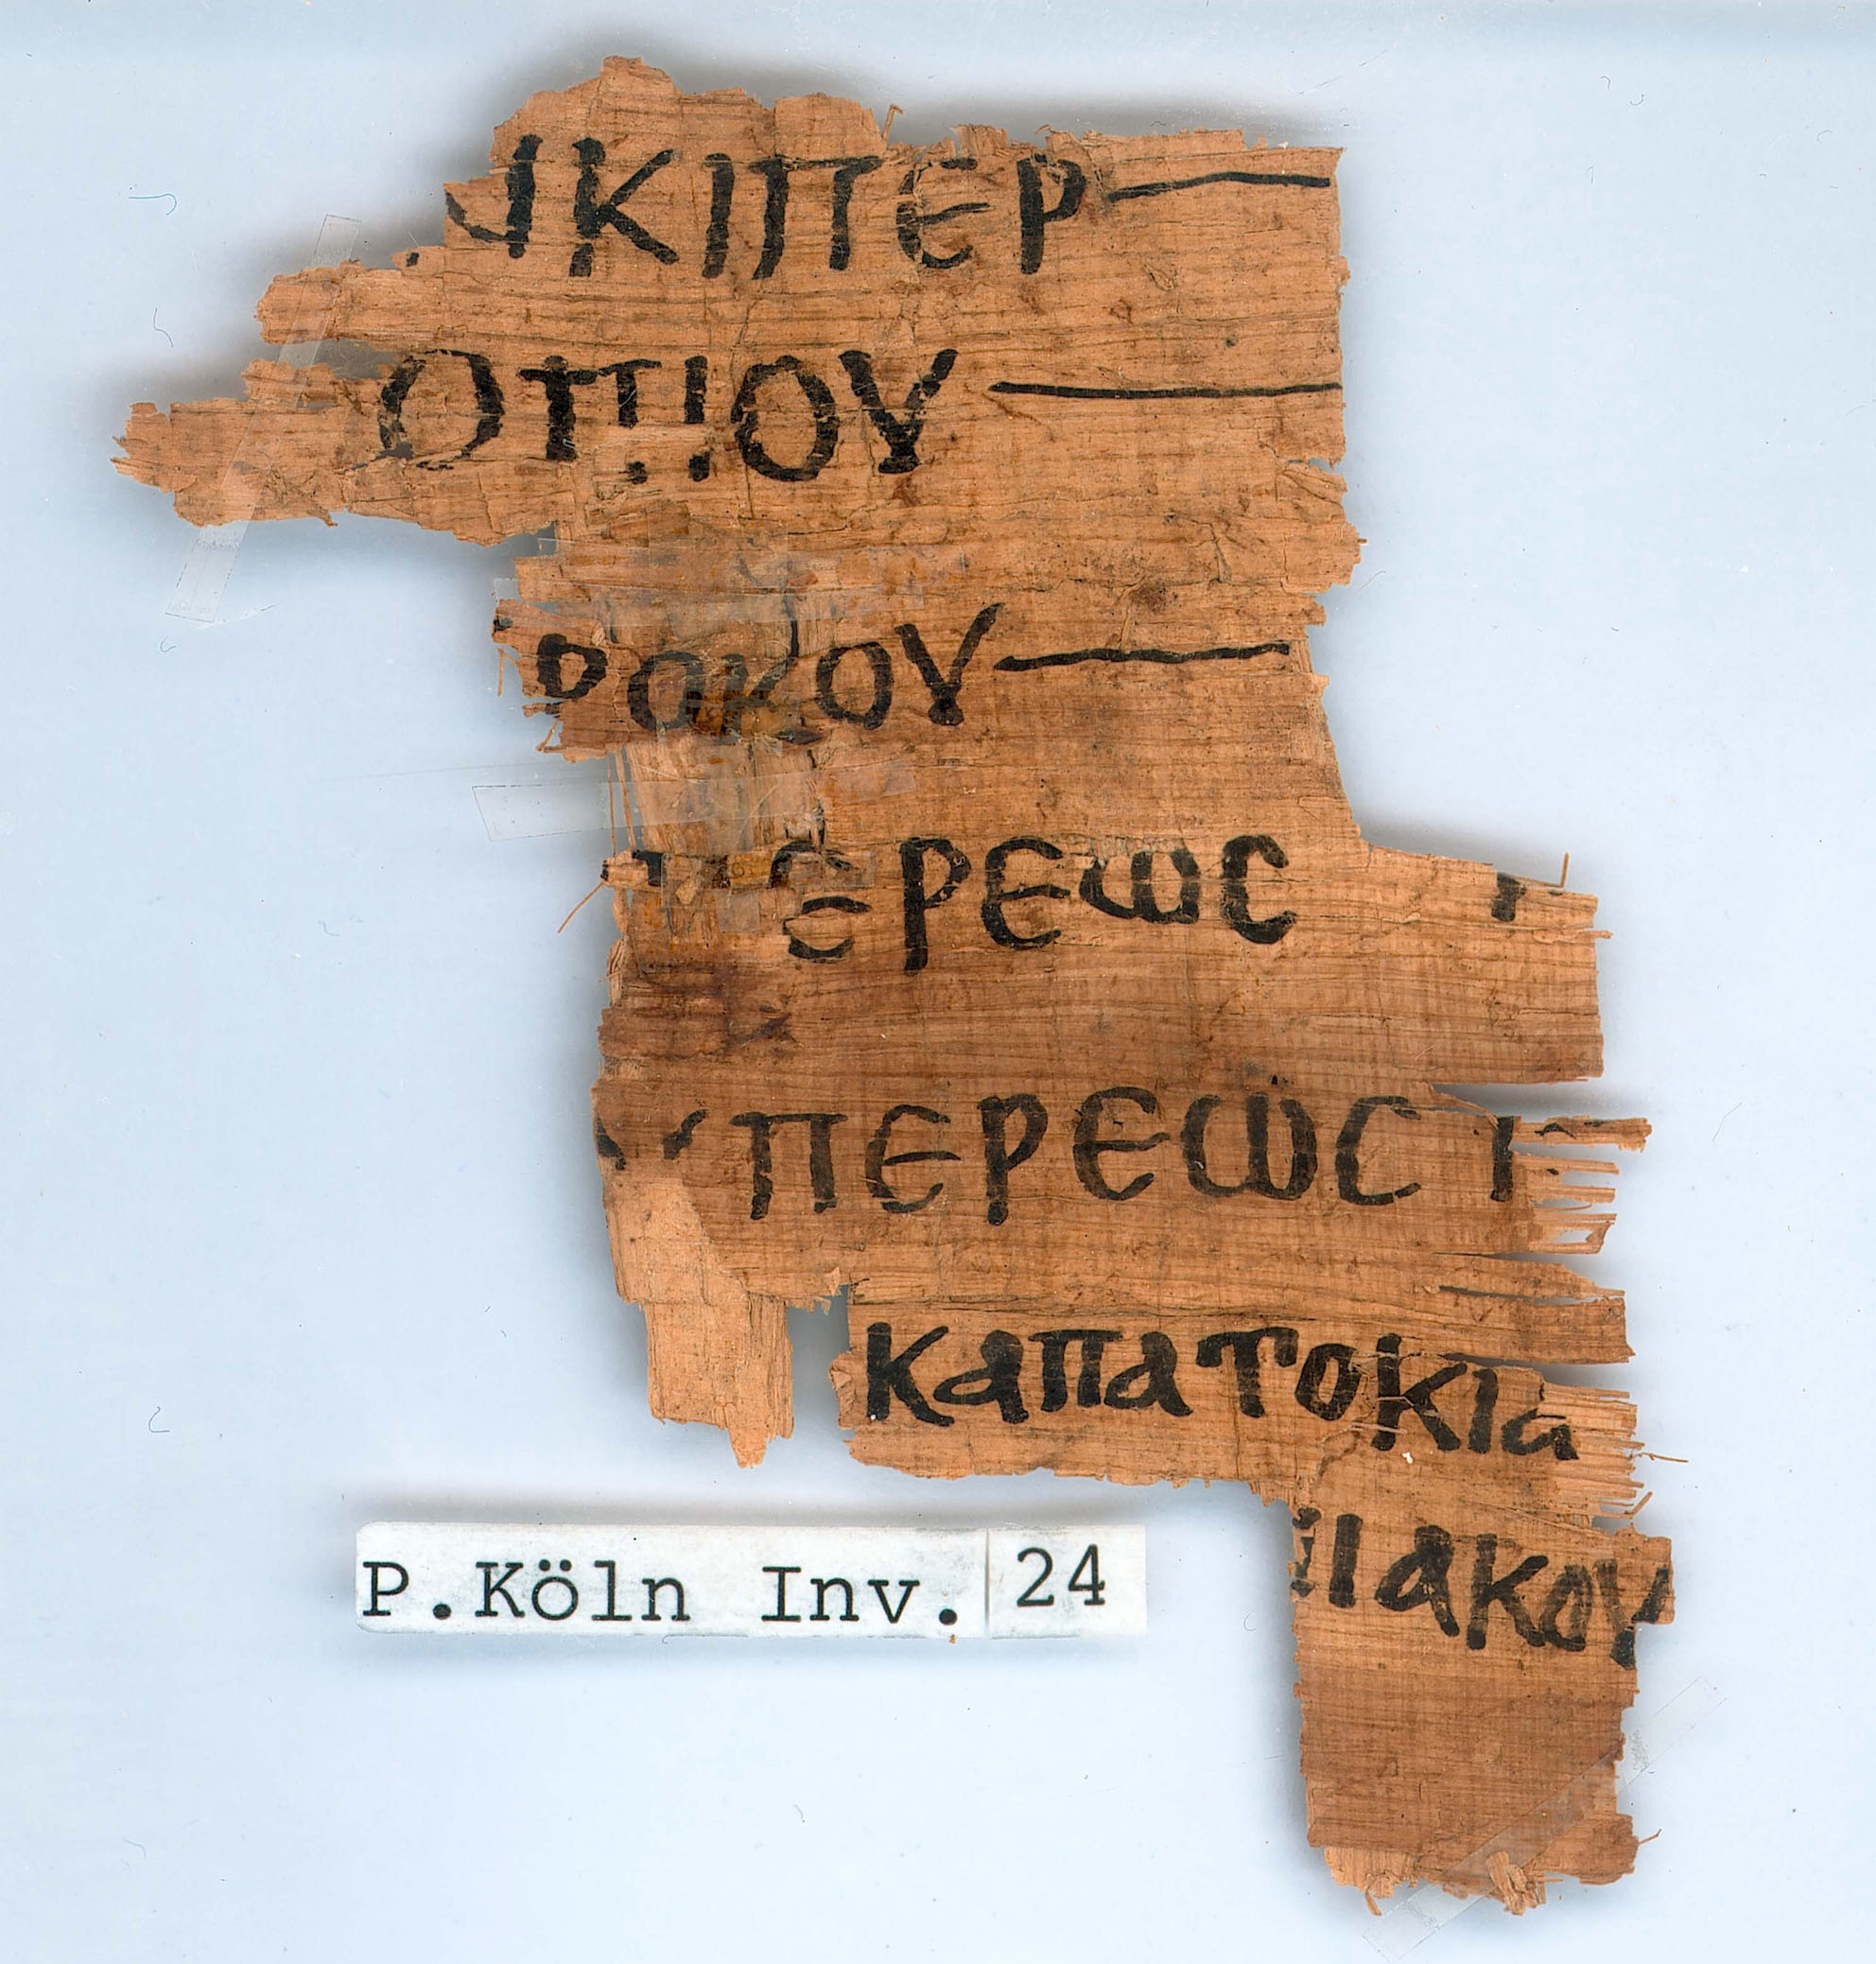 photo of a fragmentary papyrus with writing on it, photographed against a neutral background